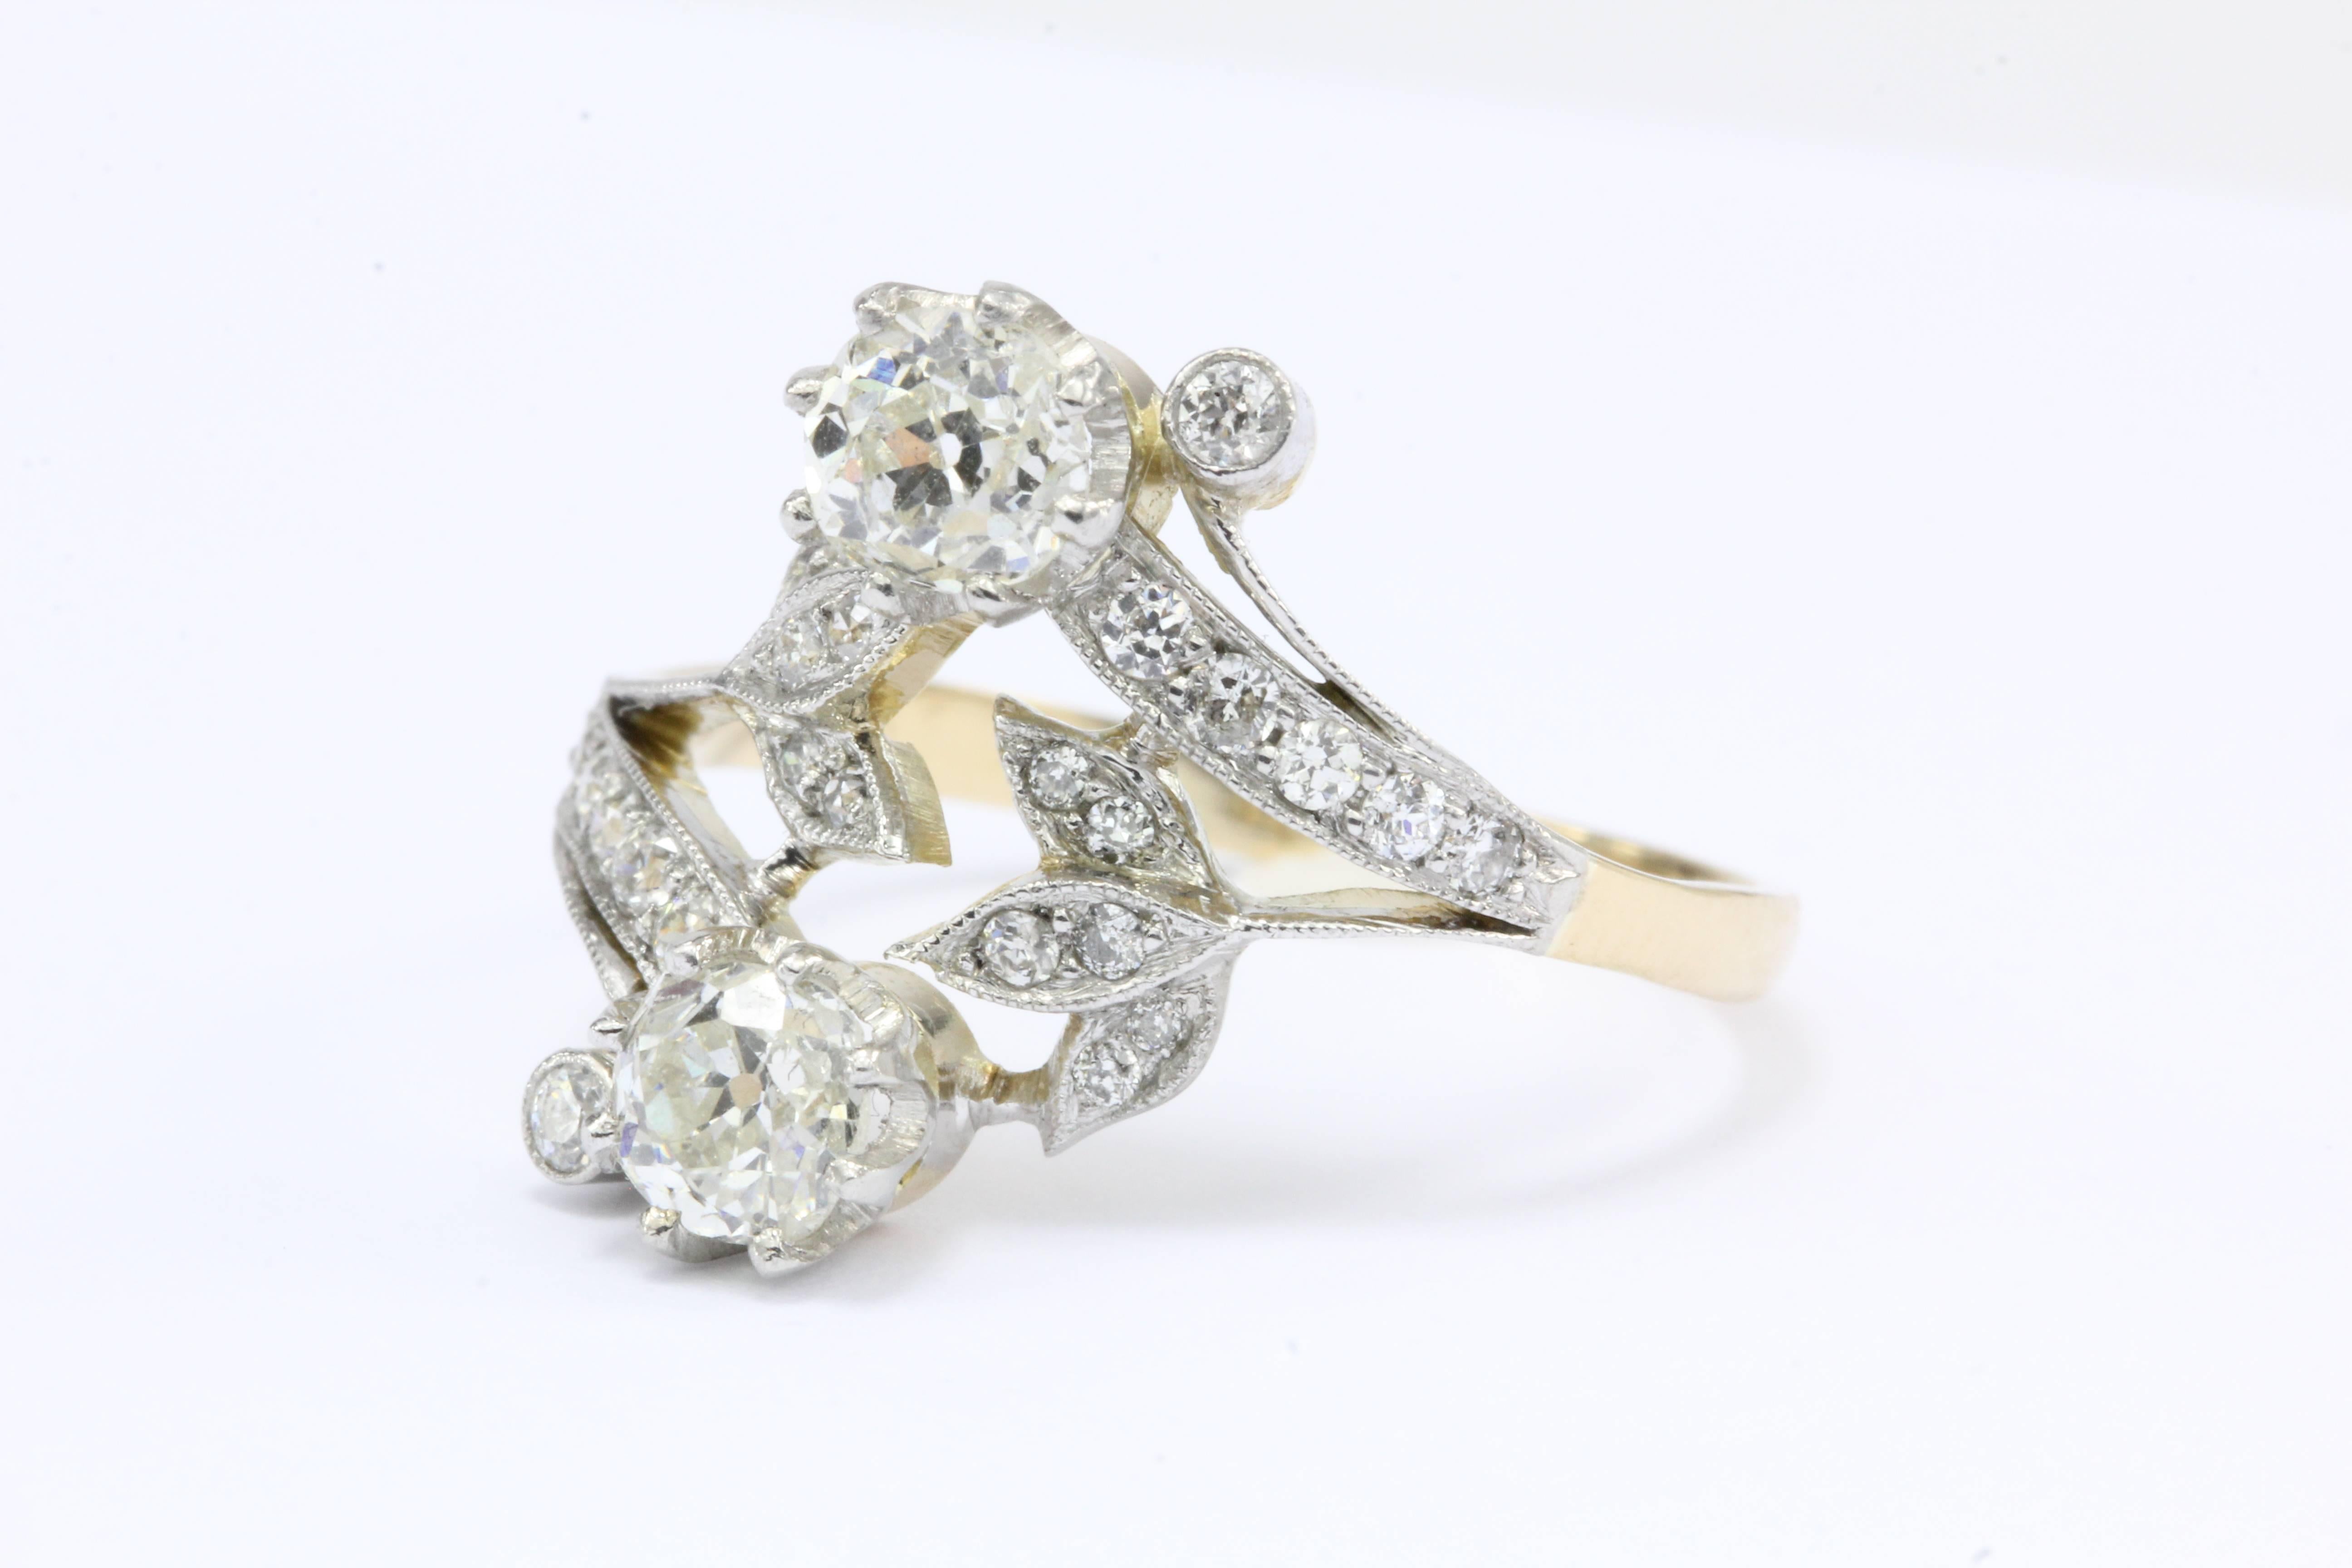 Edwardian Old Mine Diamond 18K Gold Floral Motif Ring

A matching pair of platinum set diamond flowers waltz around each other waiting to embrace on this 18k yellow gold engagement ring. The ring is mostly 18k yellow gold but the diamonds are set in